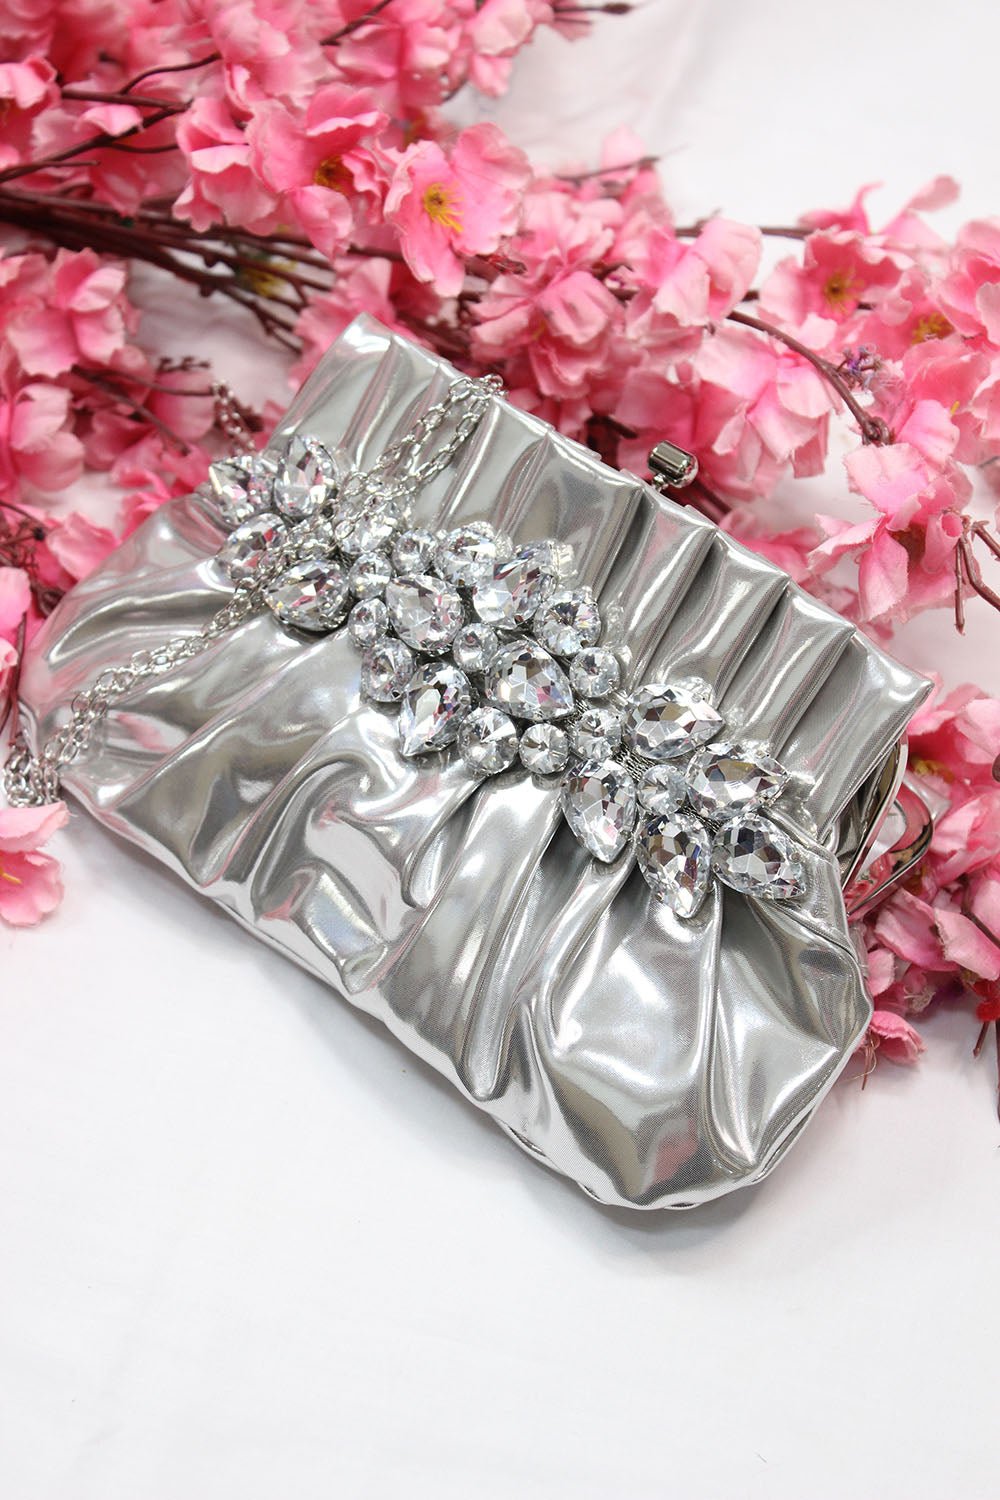 Sparkle & Shine - Make a Statement with Our Exclusive Silver Clutch Sling Bag Collection - Perfect for Any Outfit and Occasion - Luxurion World